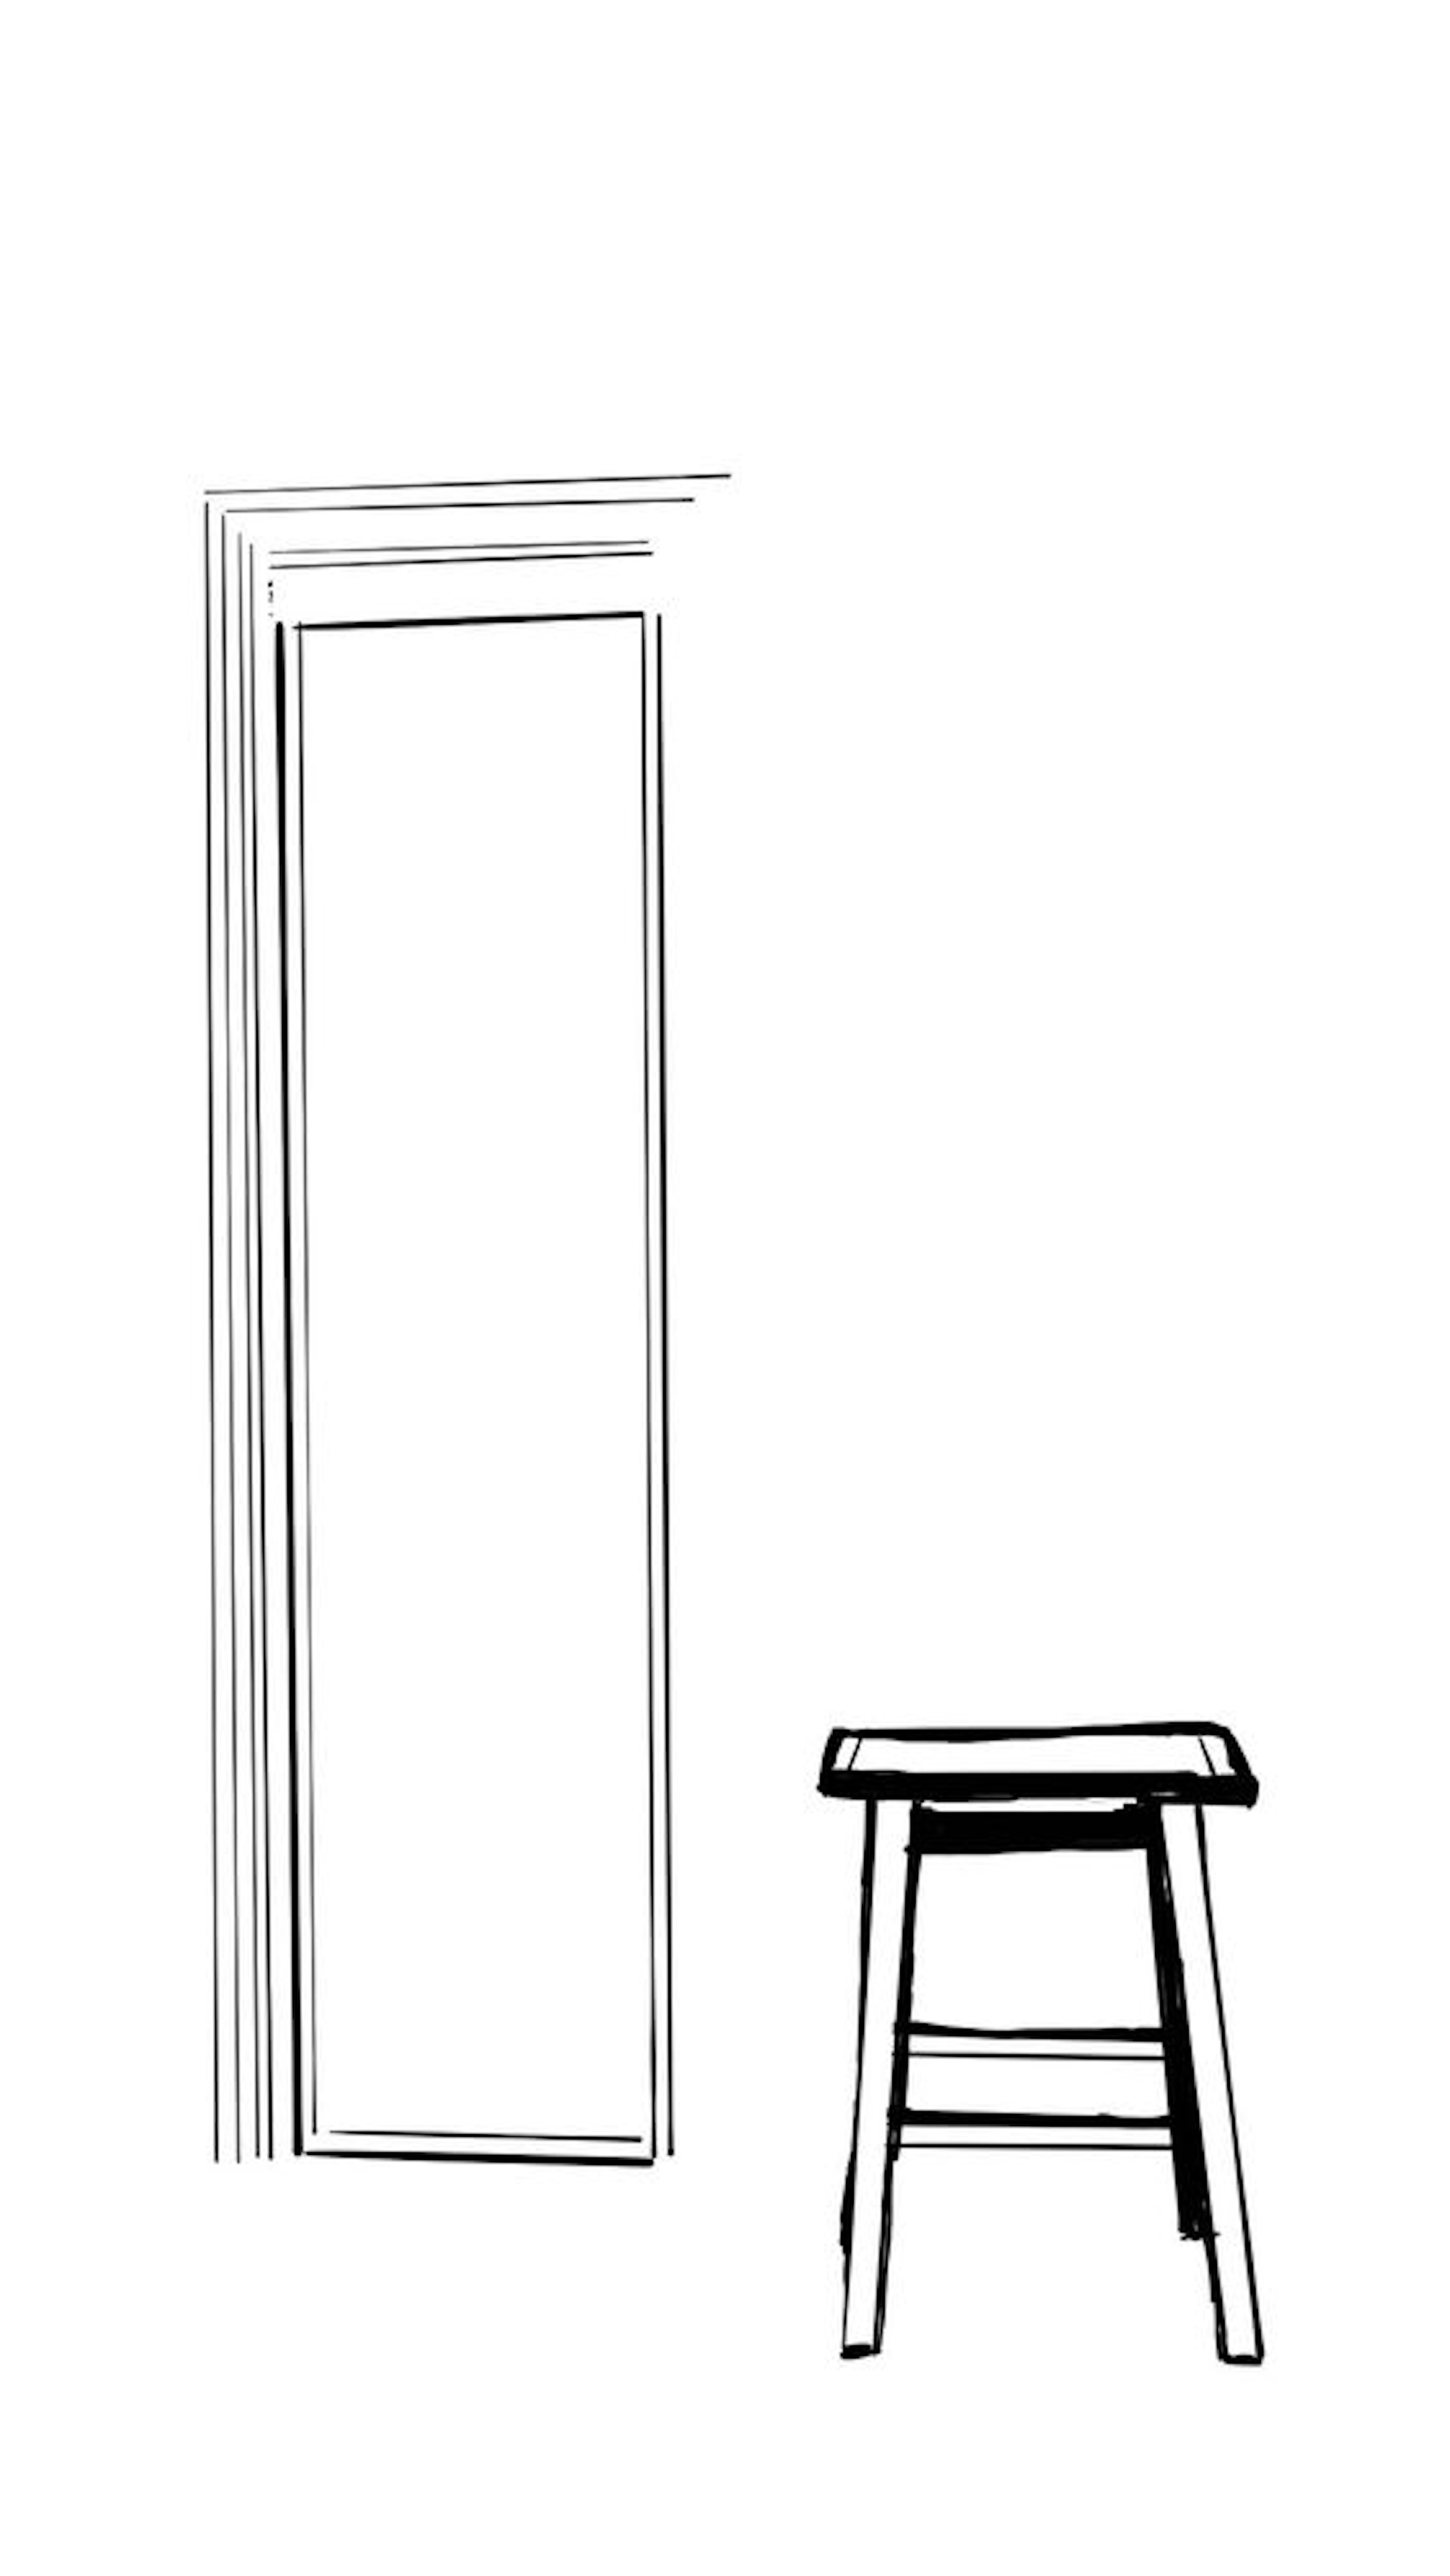 Minimal black and white line drawing. On the left are a grouping of lines that represent a section of a door. To the right is a stool drawn with thicker lines.